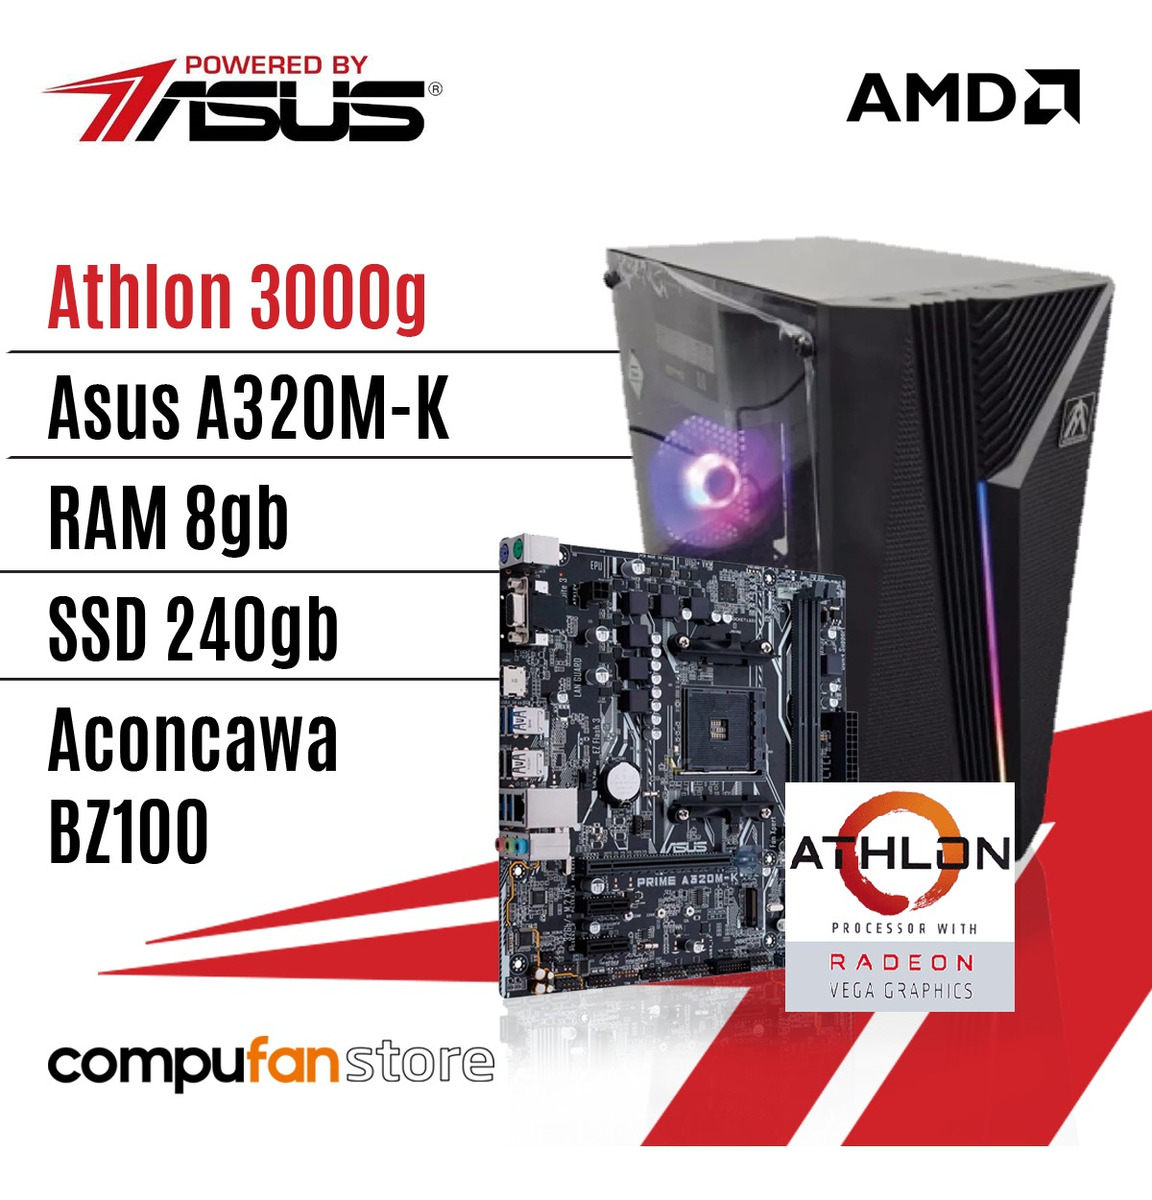 Pc Gamer Powered By Asus Athlon 3000g A320m-k 8gb 